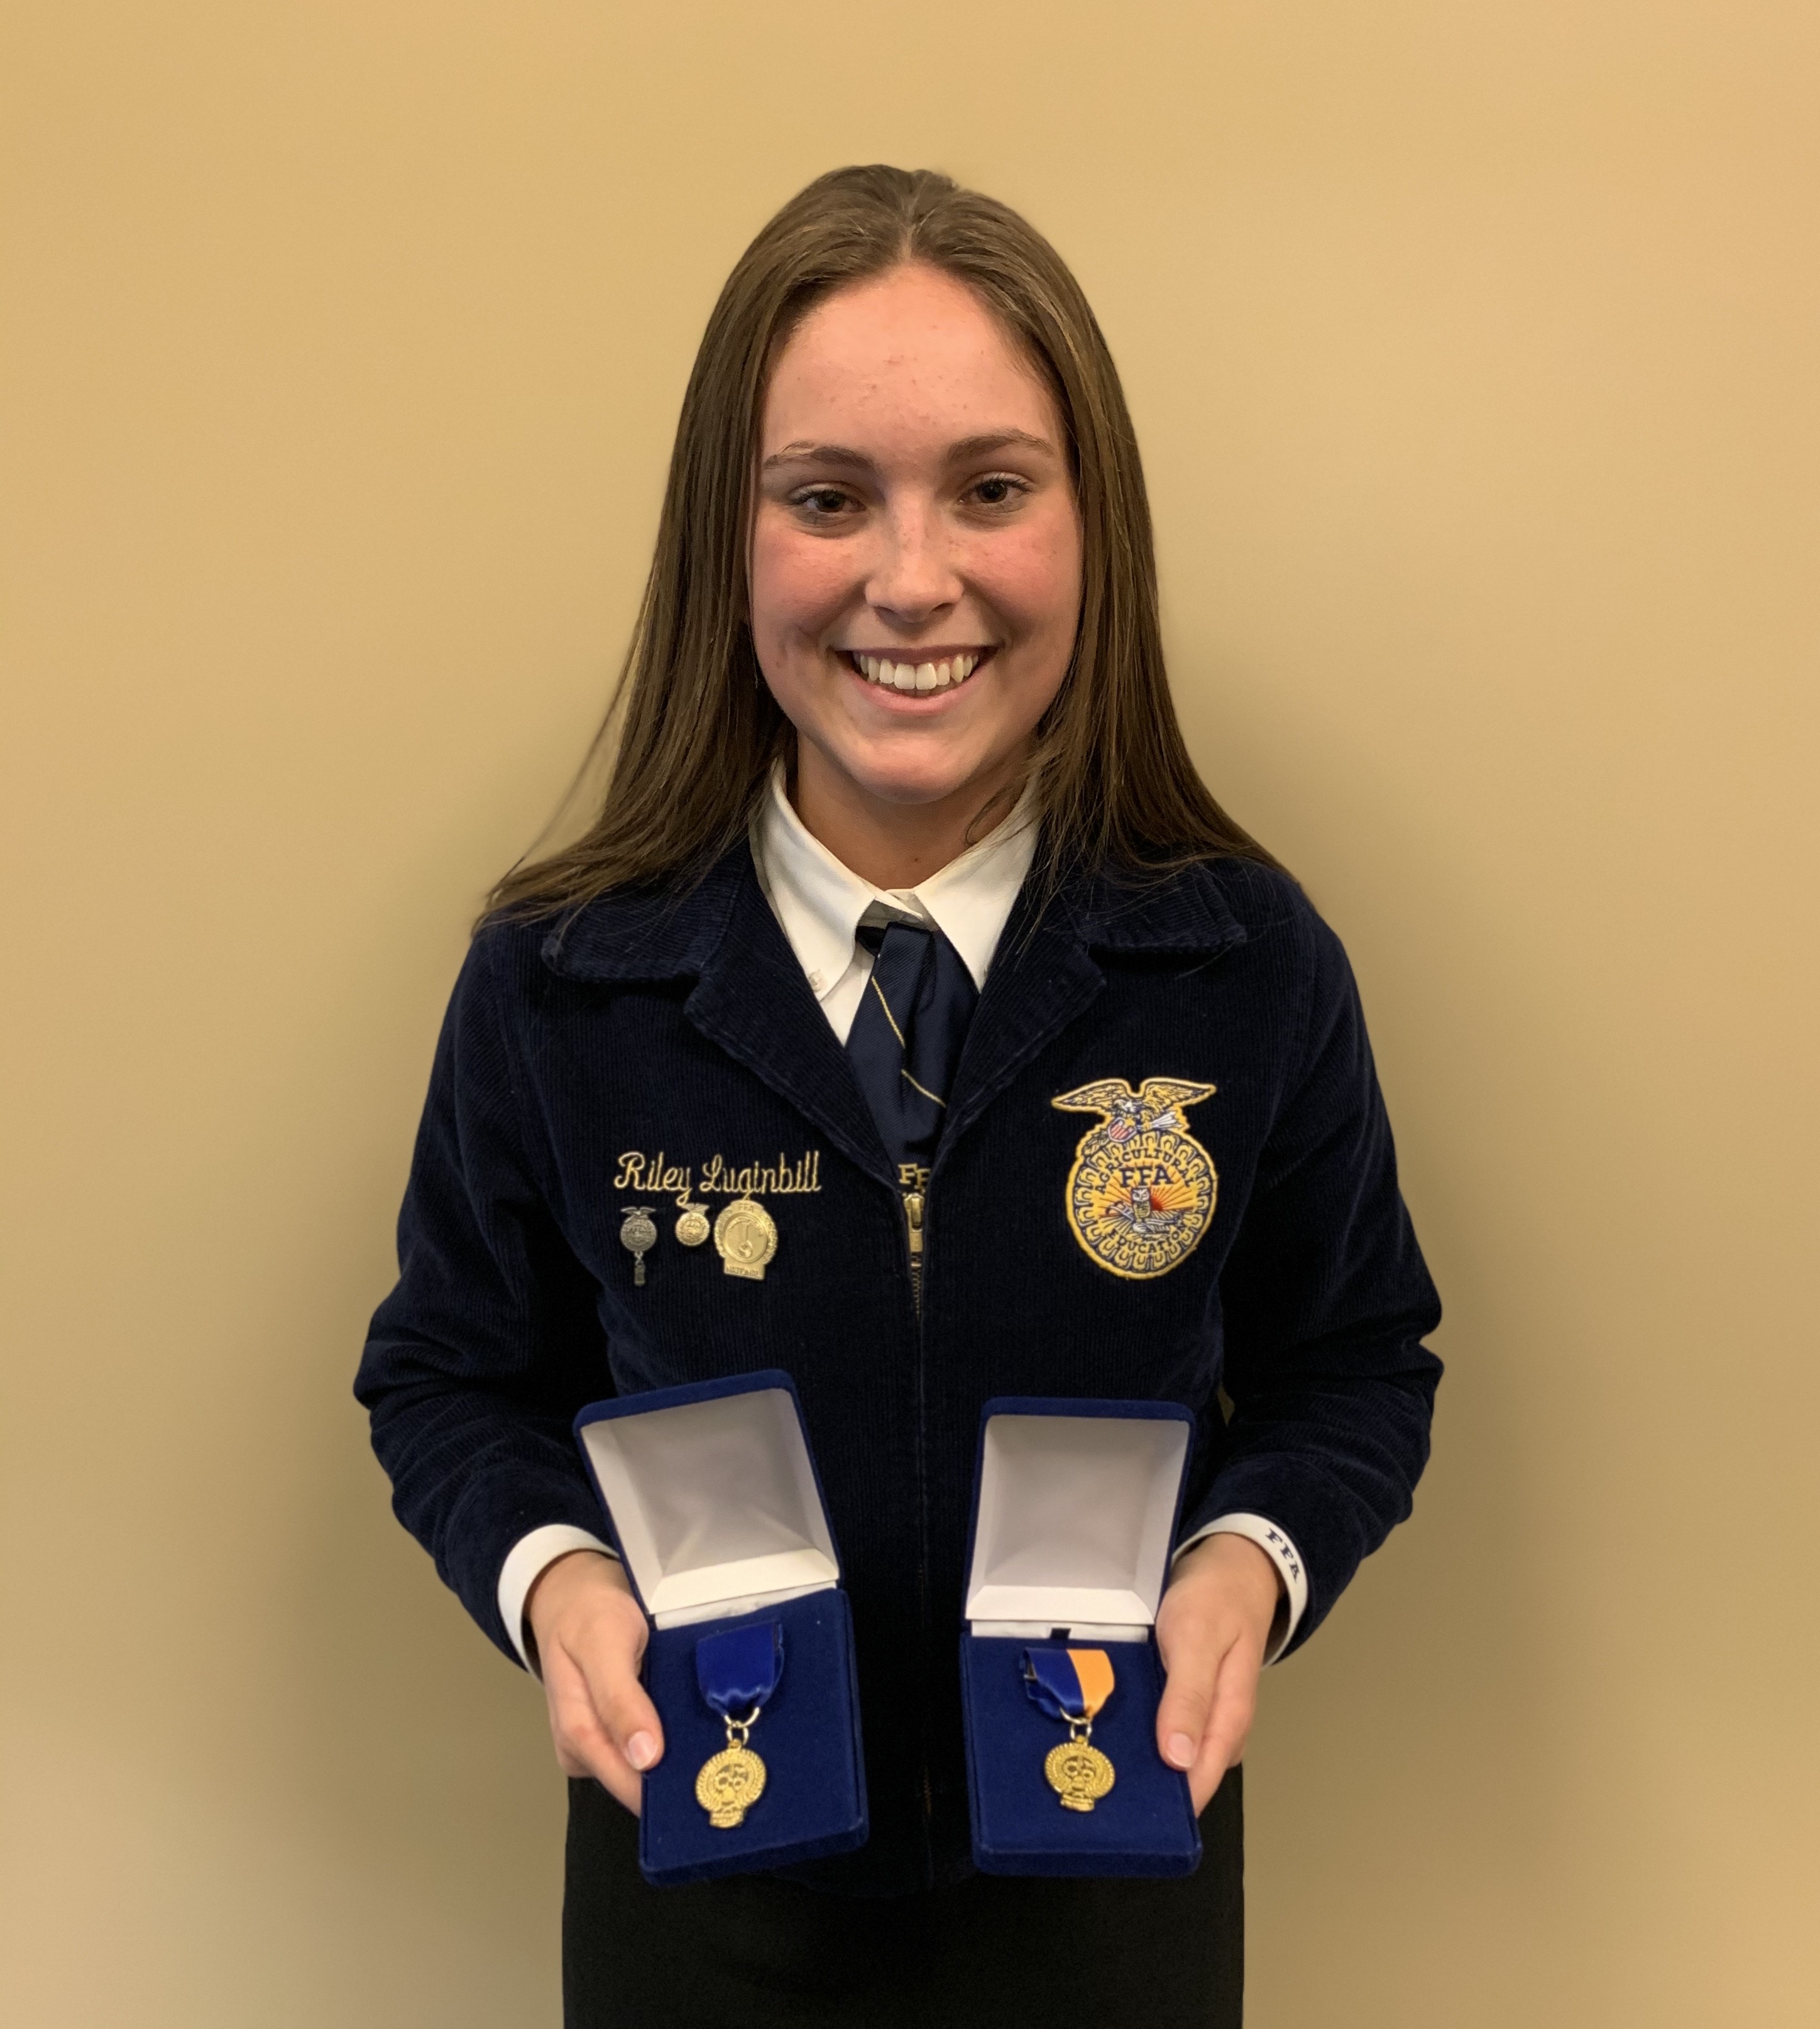 Meet Your 2019 National Proficiency Award Winner in Agriscience Research- Animal Systems- Riley Luginbill of Stillwater  FFA